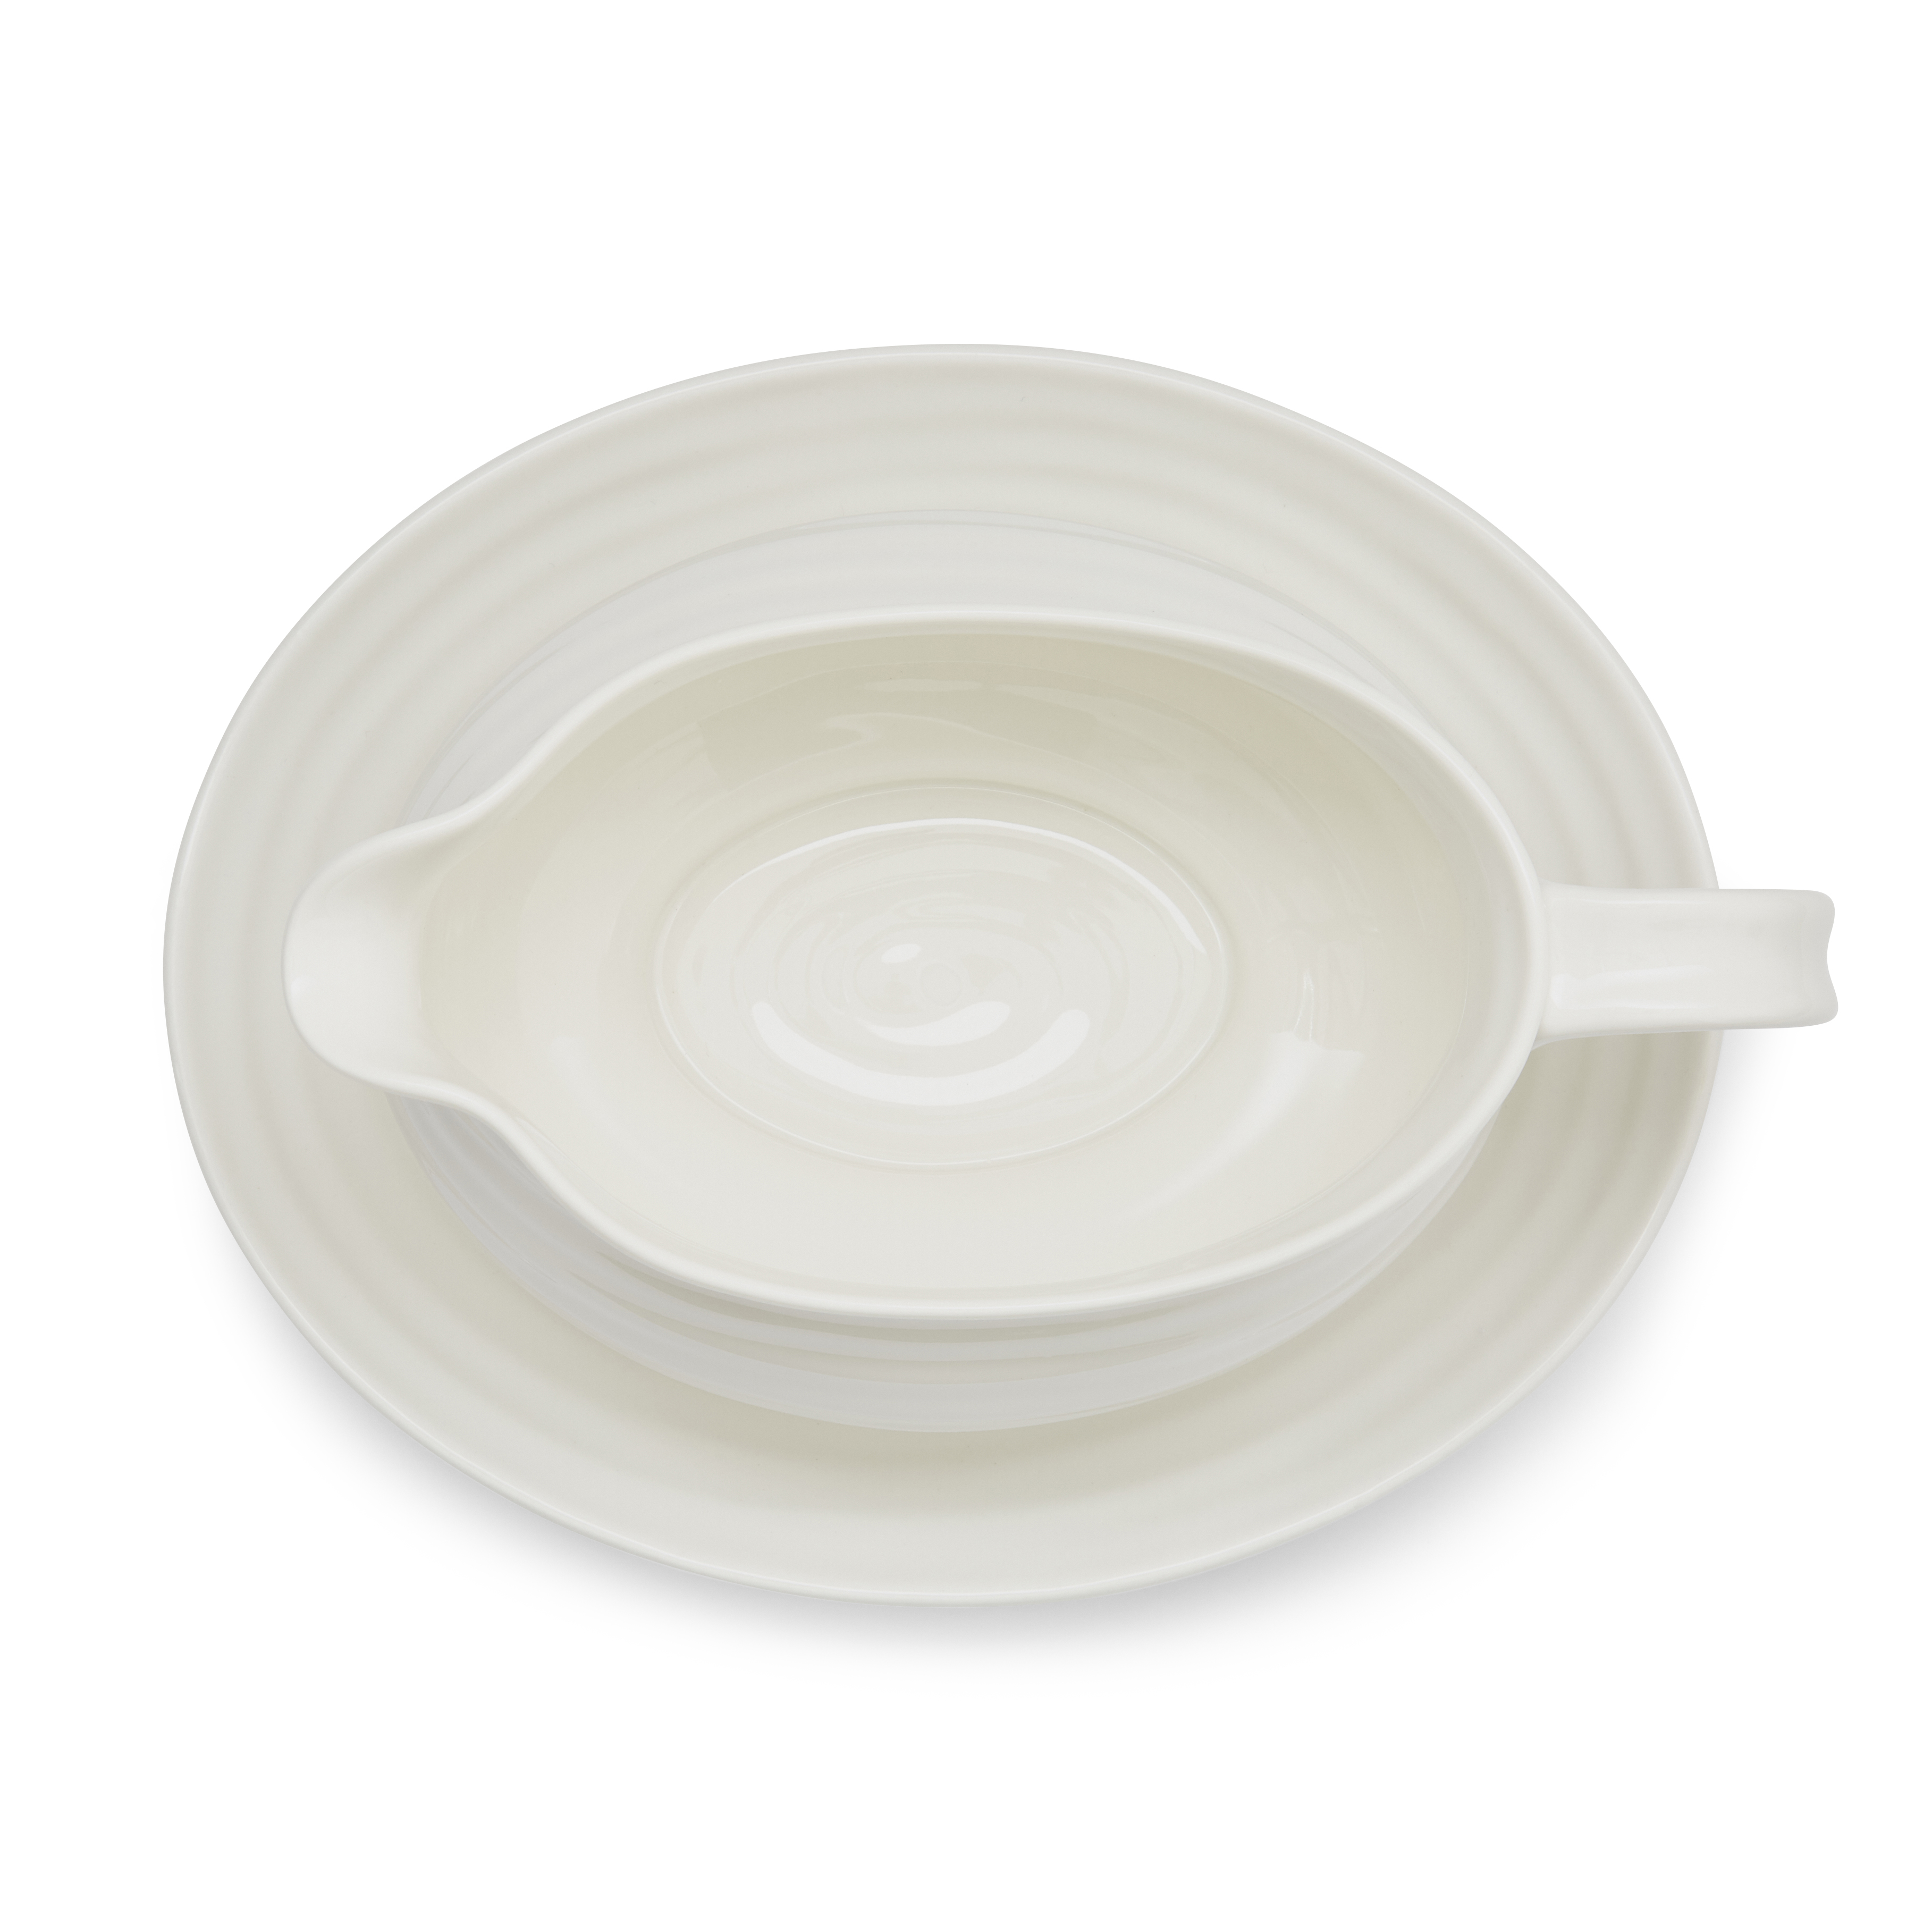 Sophie Conran Gravy Boat & Stand, White image number null